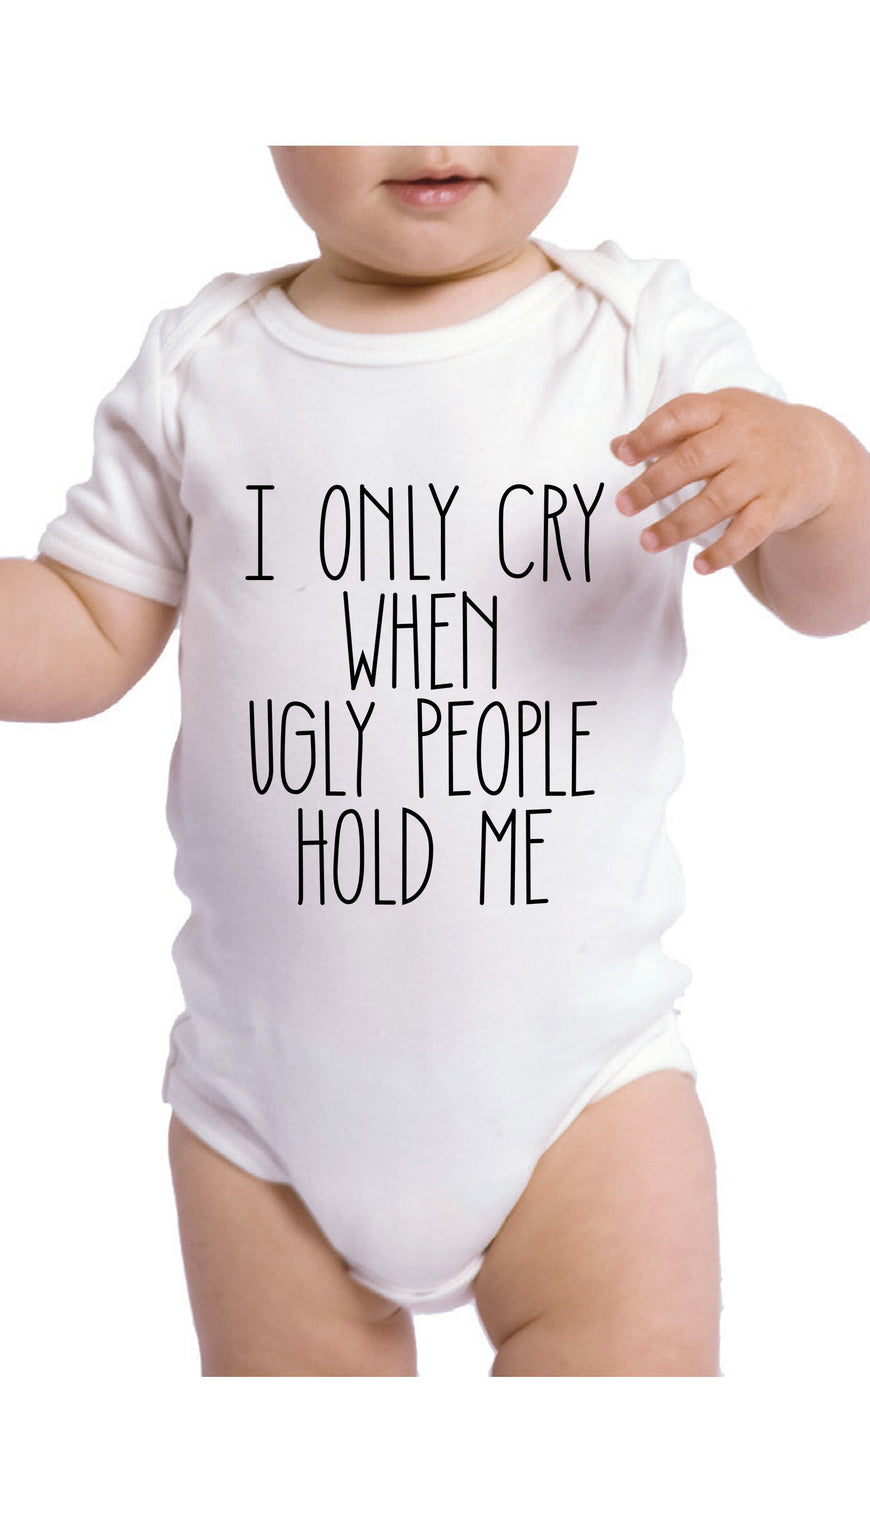 I Only Cry When Ugly People Hold Me Funny & Clever Baby Infant Onesie Gift | Sarcastic ME